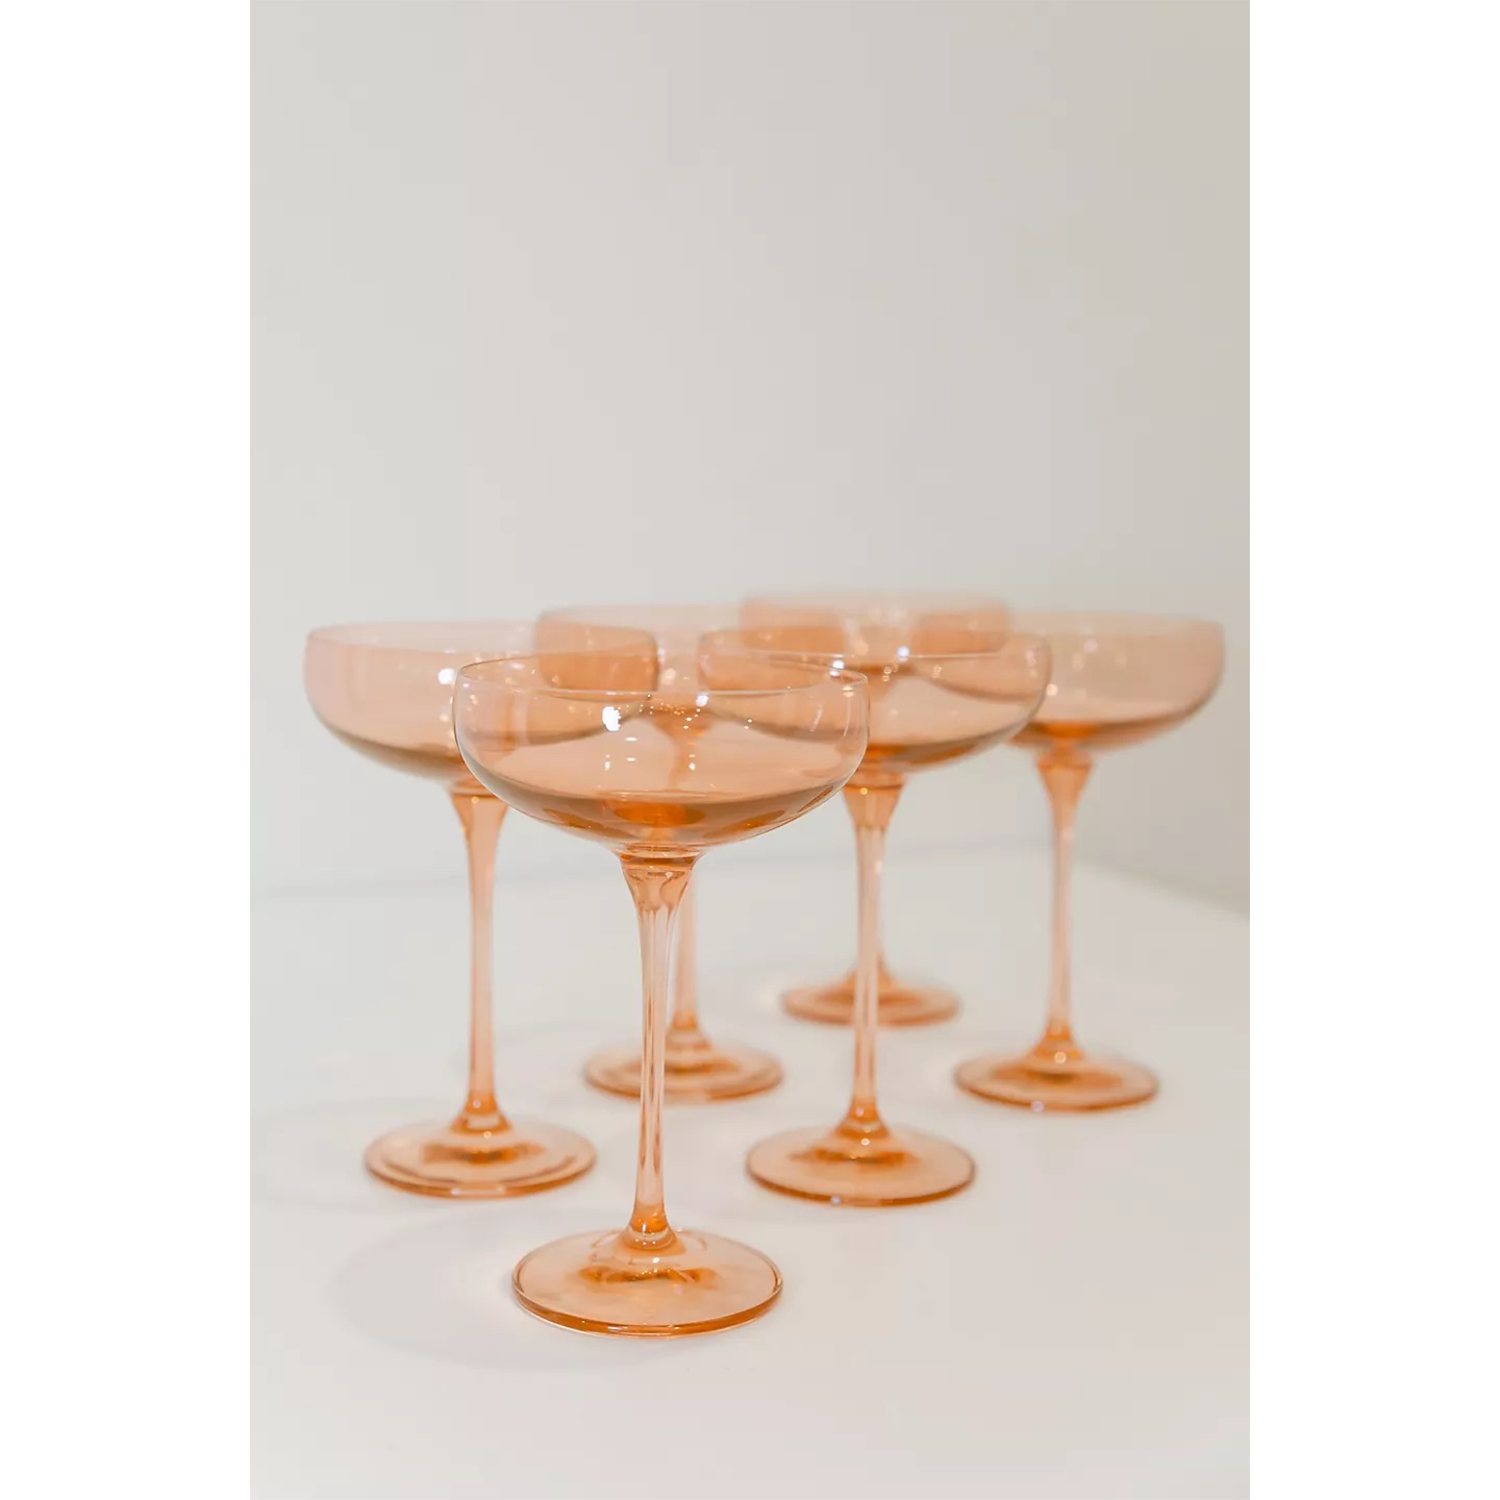 https://www.anthropologie.com/anthroliving/shop/estelle-colored-glass-champagne-coupe-set2?category=collection-kitchen-glassware&color=065